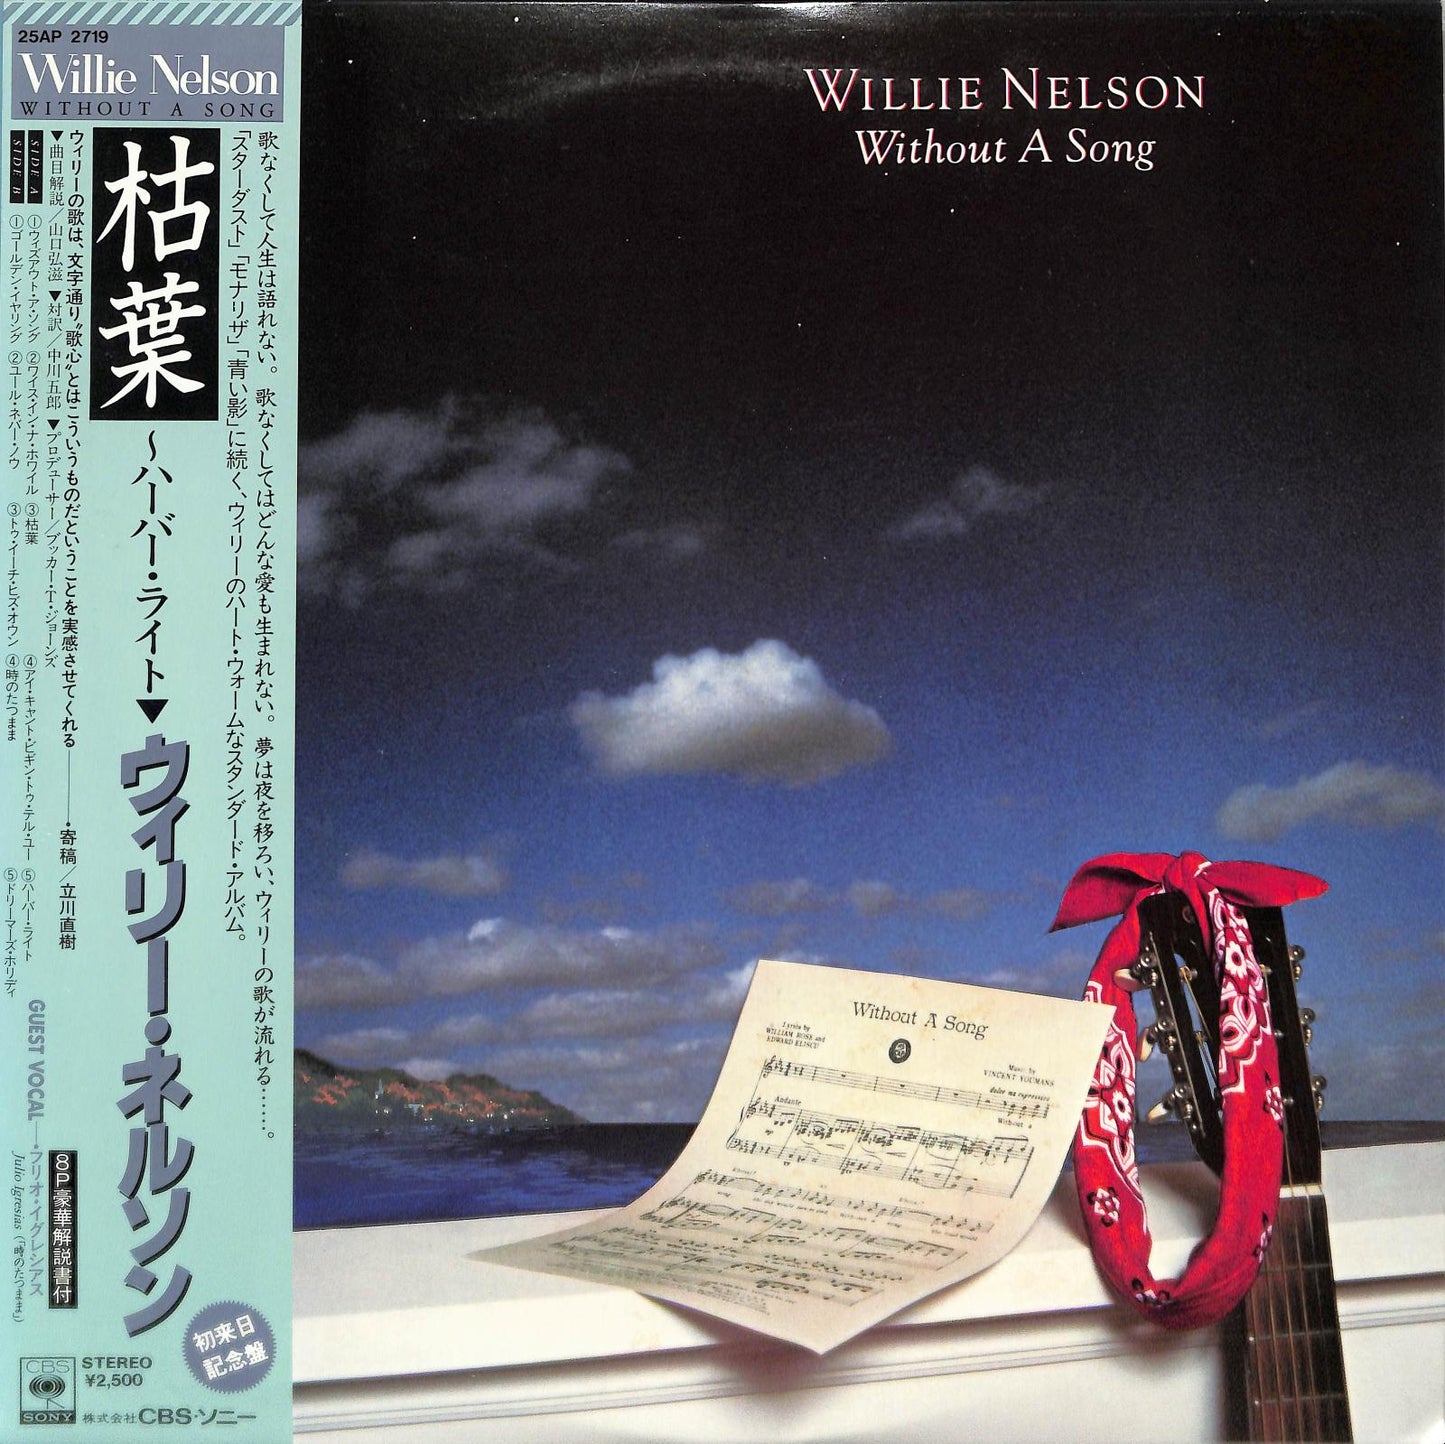 WILLIE NELSON - Without A Song